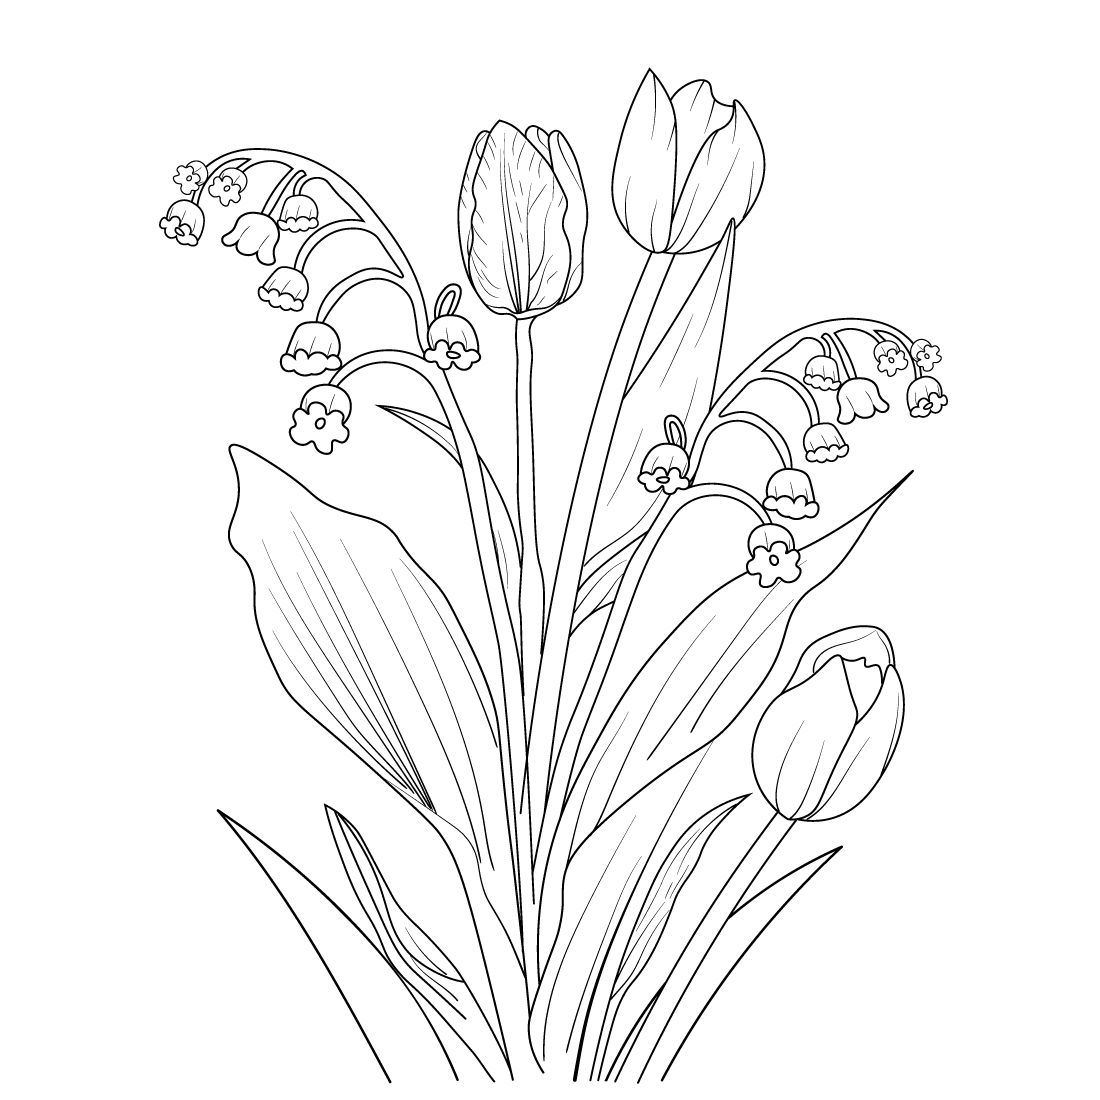 tulip illustration simple, vintage tulip illustration, tulip flower drawing, pencil realistic tulip drawing, preview image.